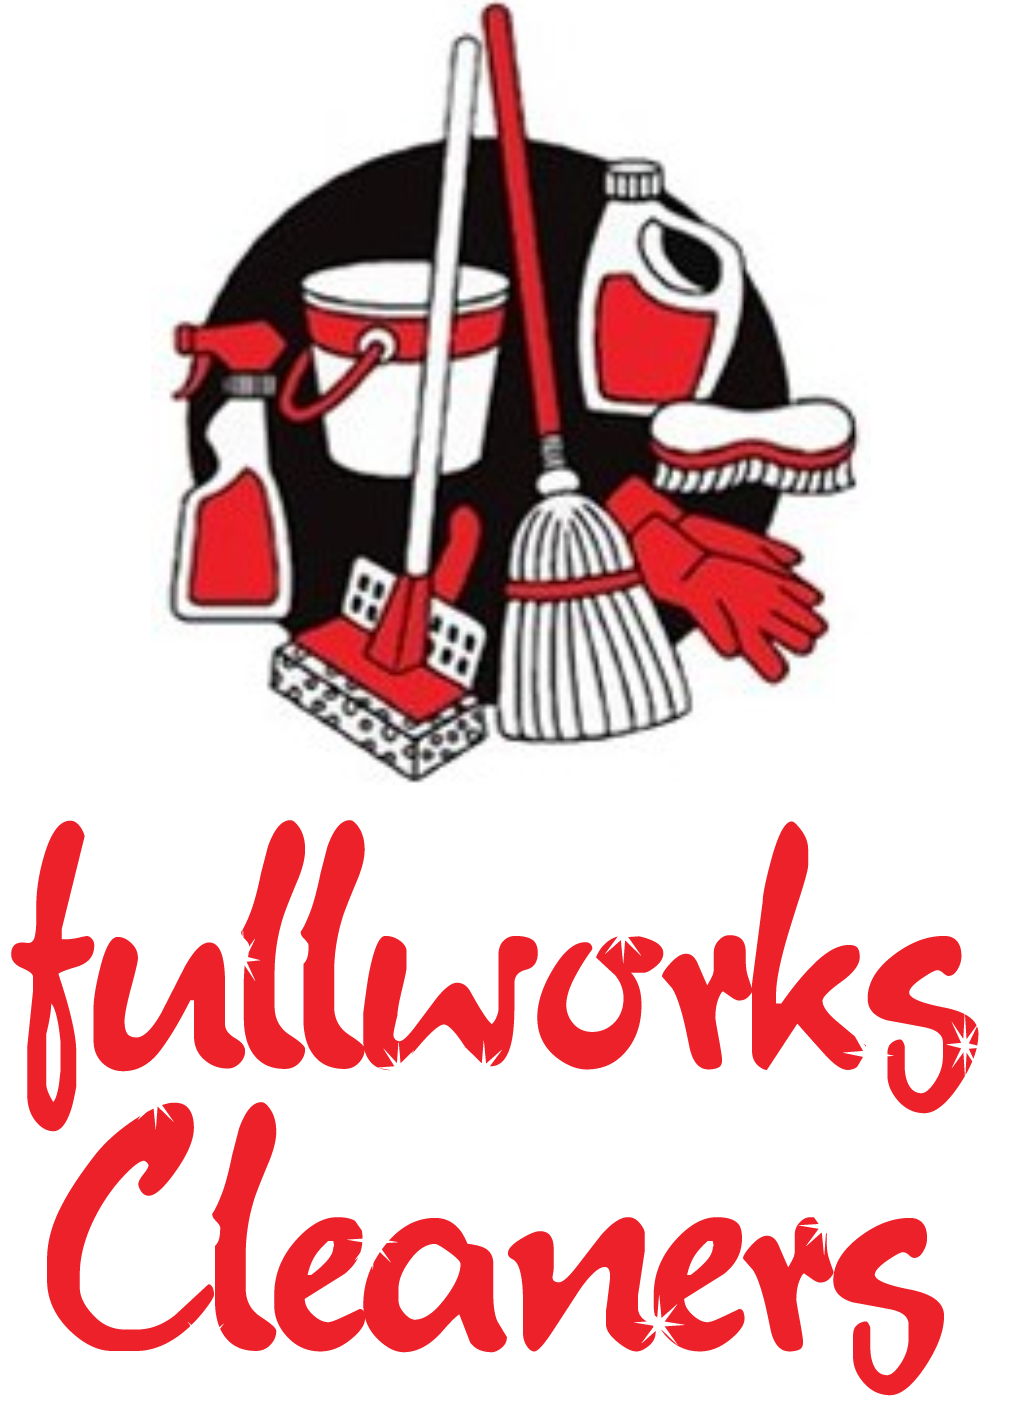 Fullworks Cleaners